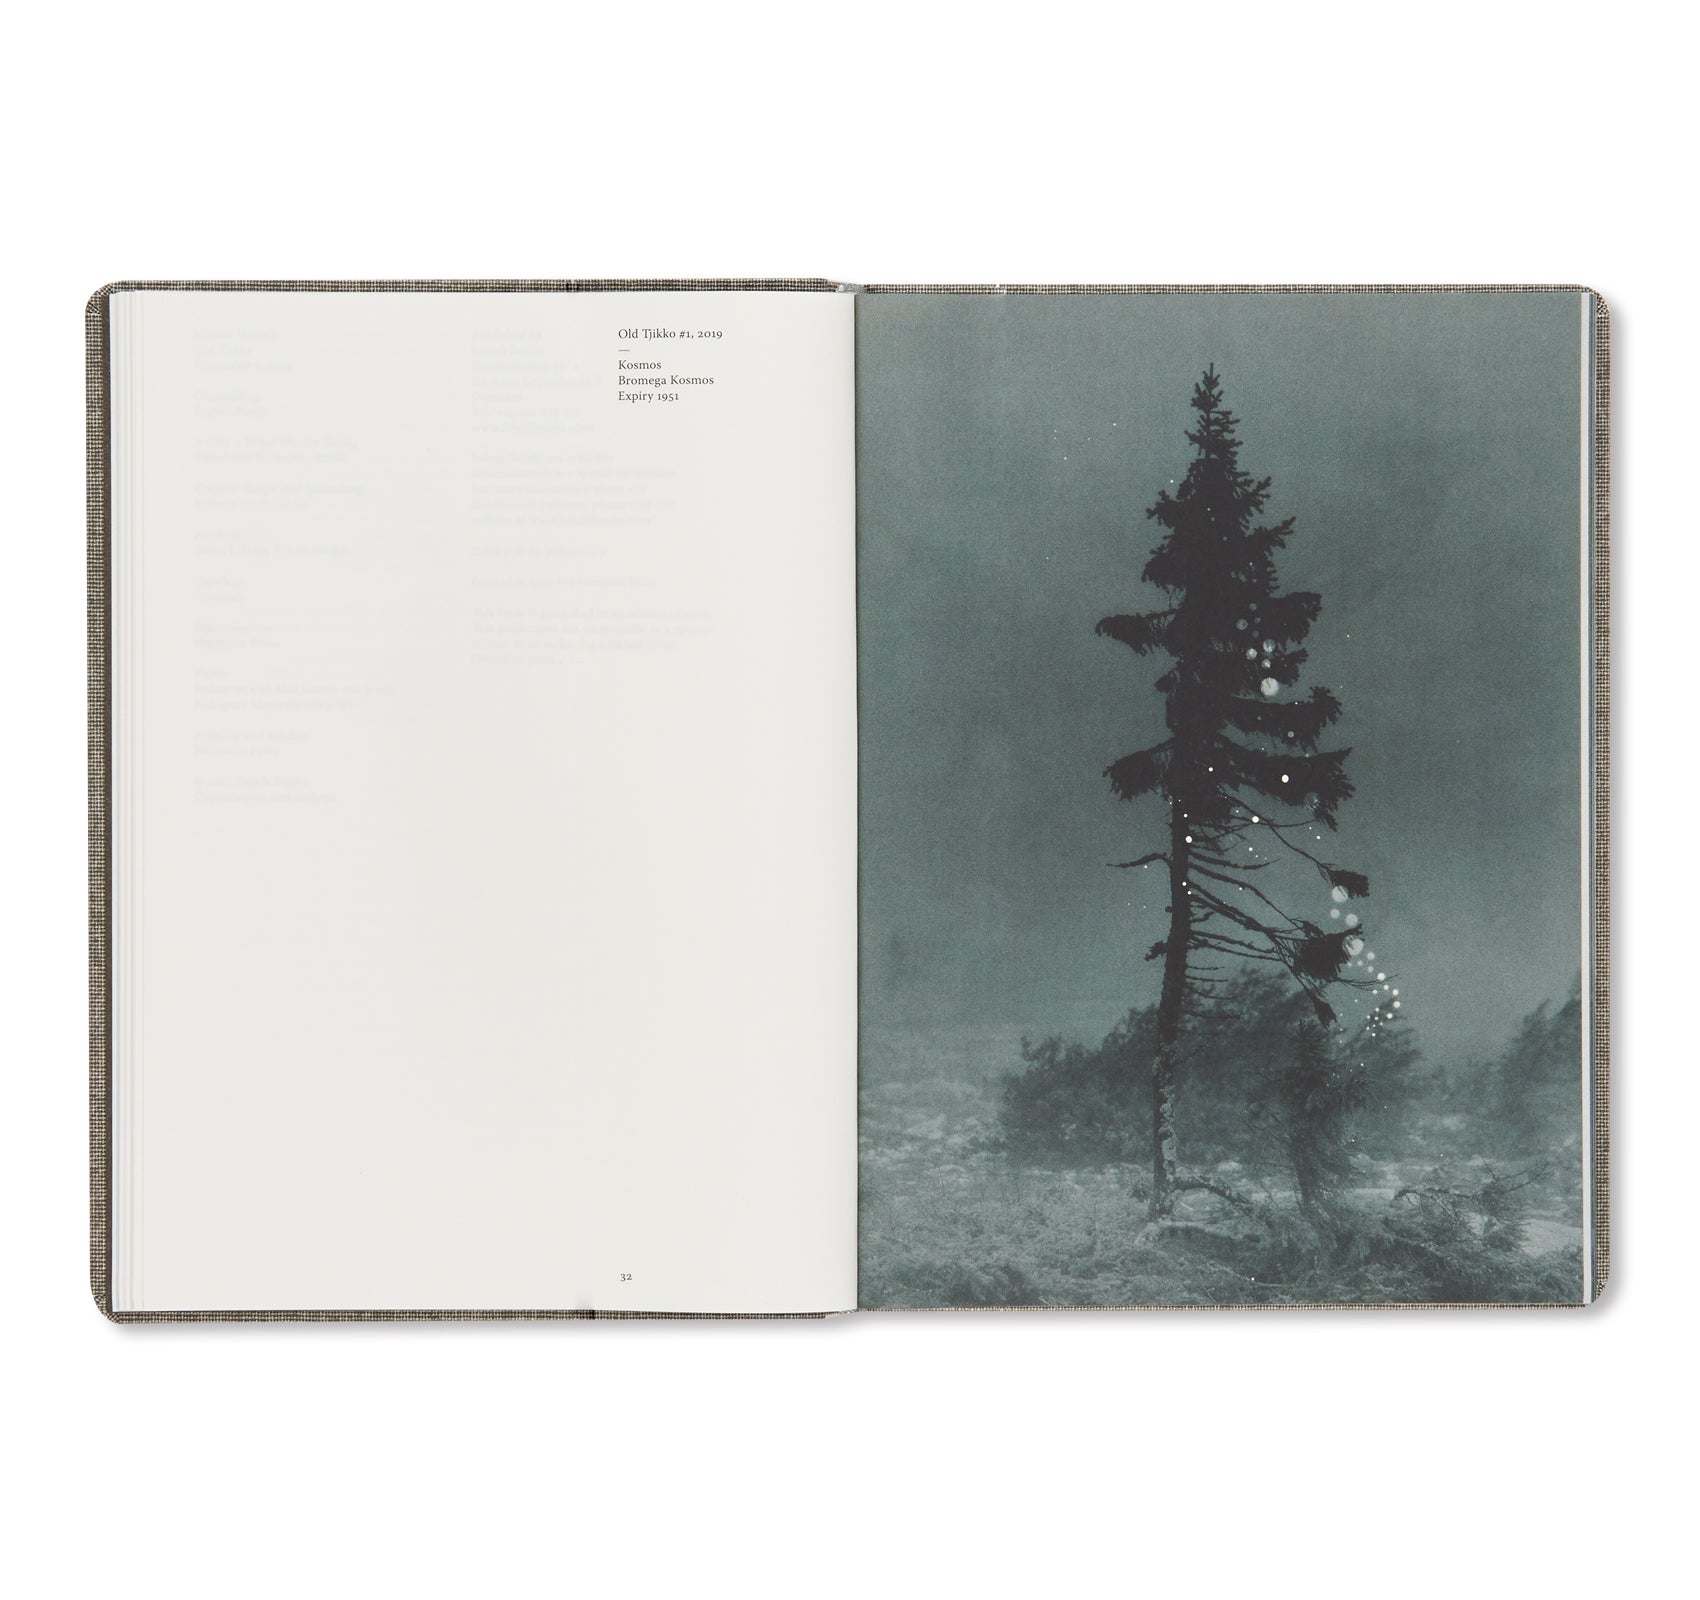 OLD TJIKKO by Nicolai Howalt [SECOND EDITION]